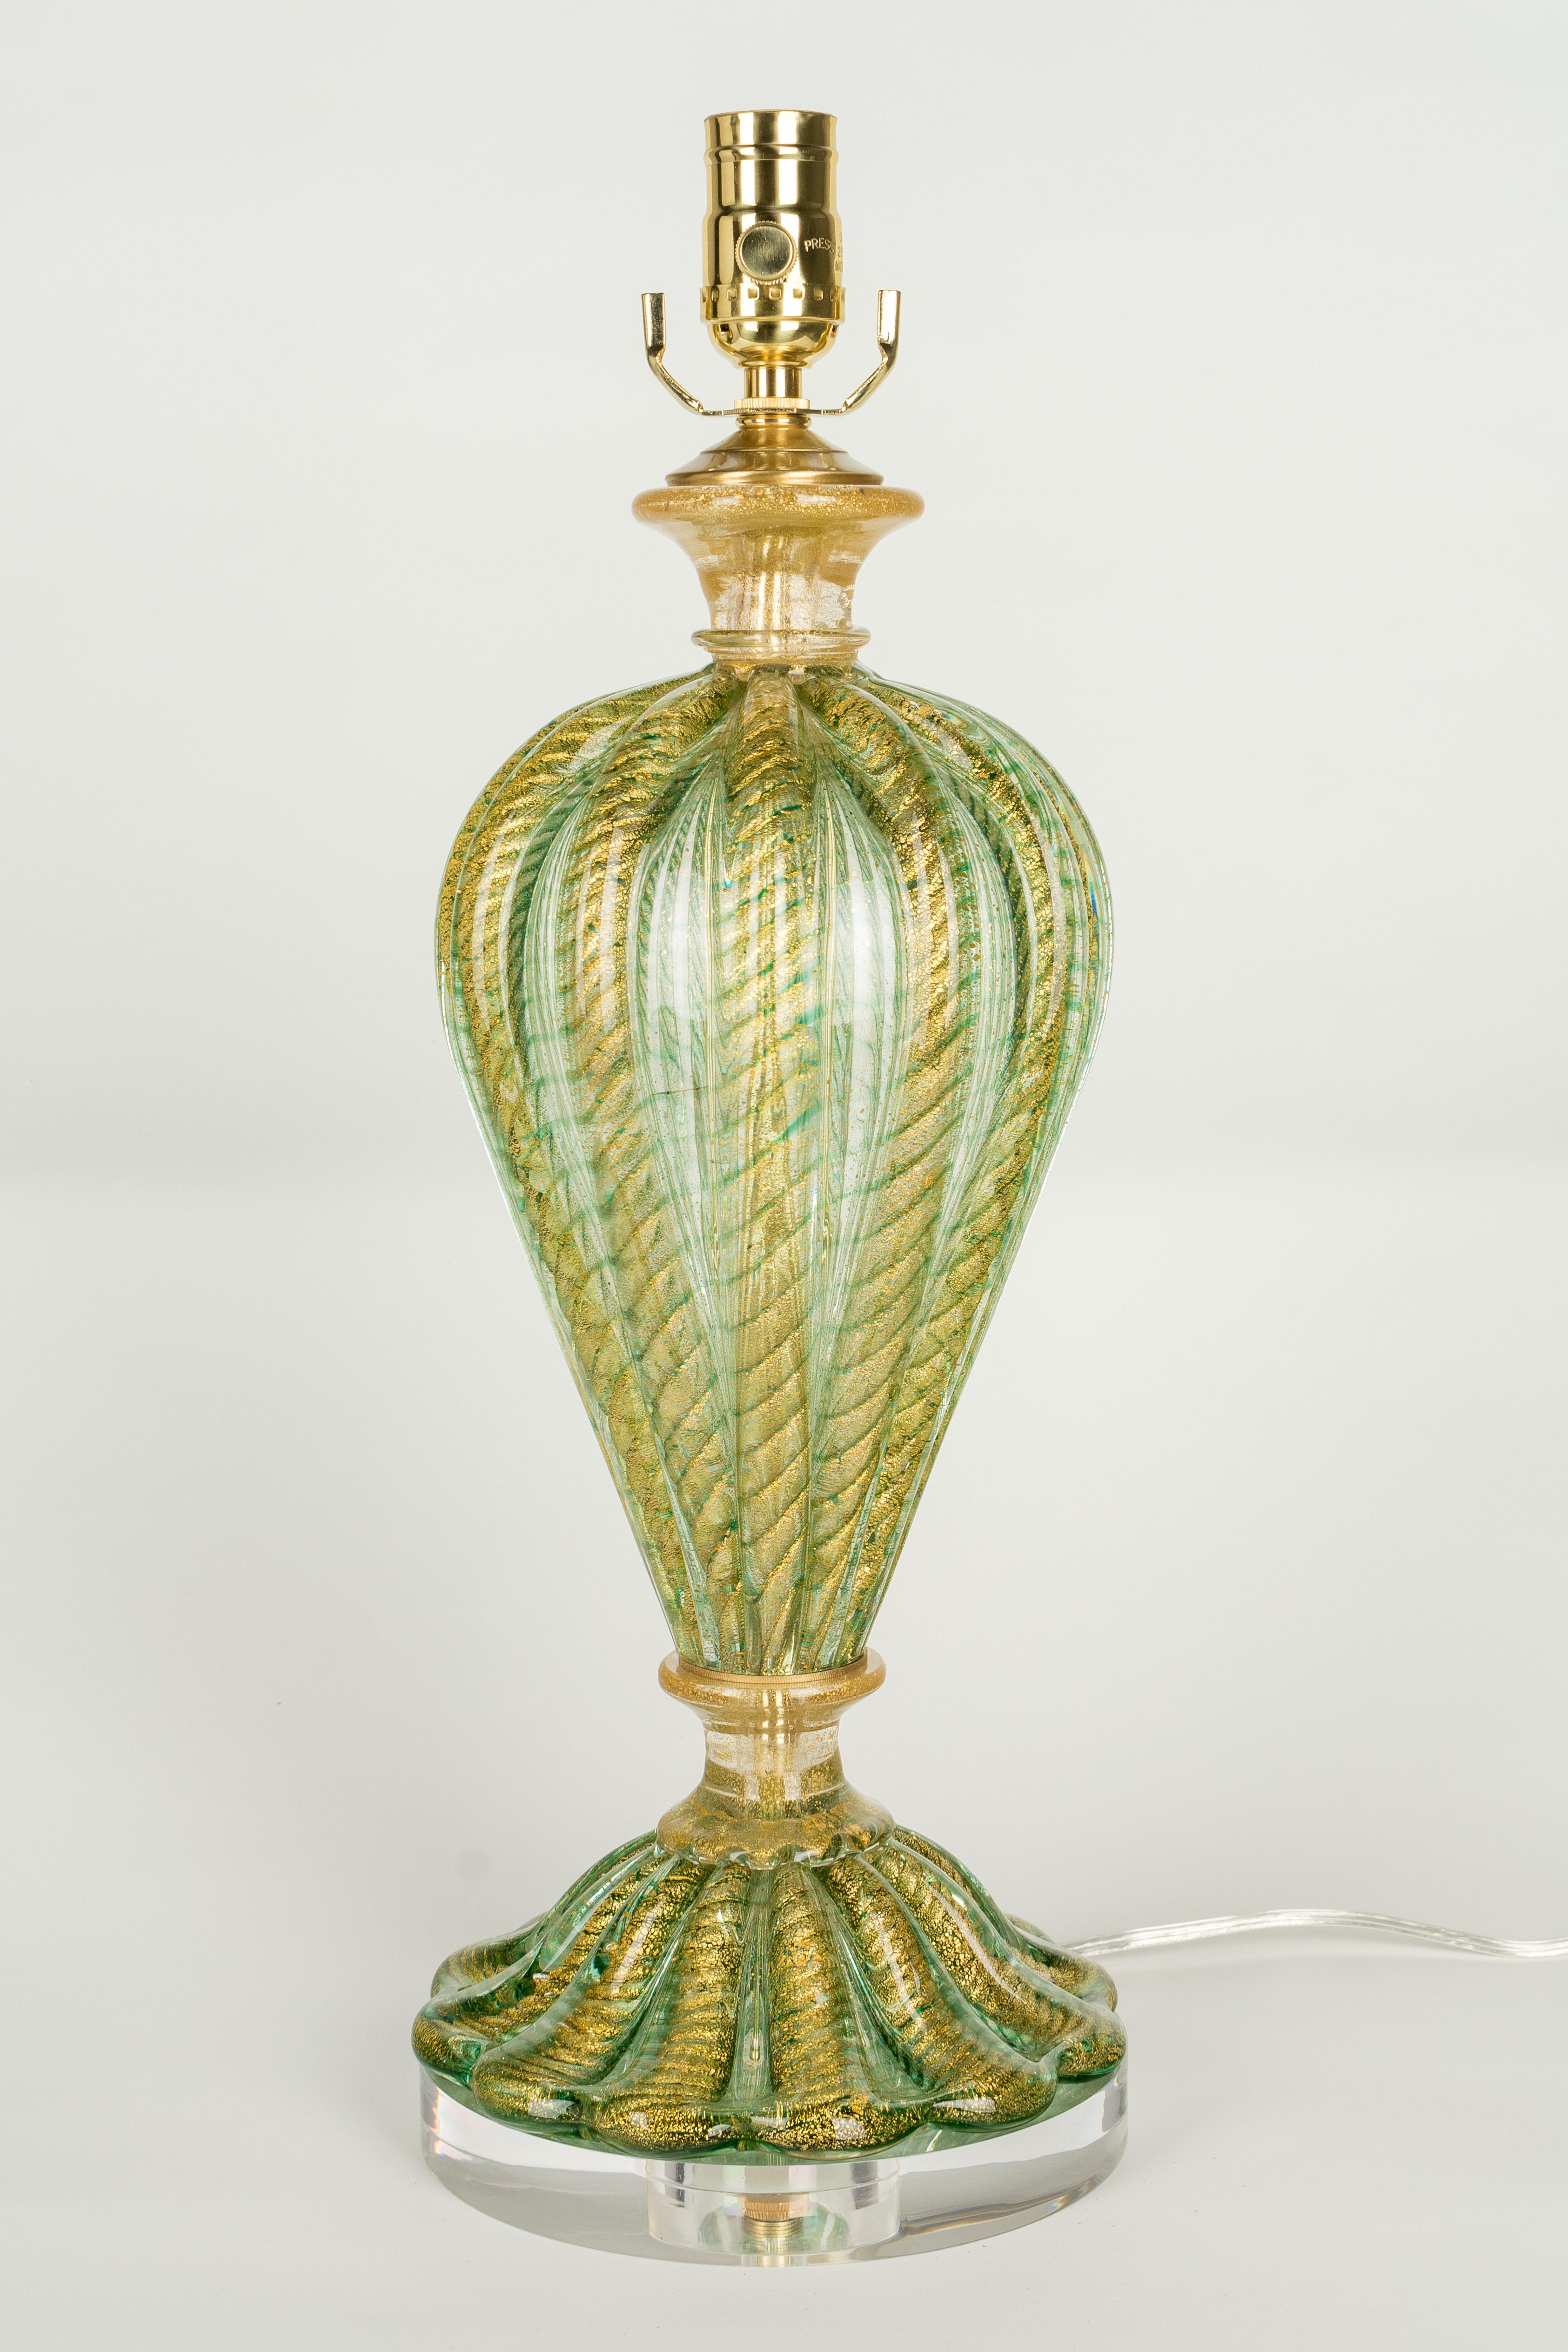 A midcentury Murano glass lamp by Barovier & Toso in a beautiful shade of apple green with bright gold inclusions. Glass is hand blown in two parts with real gold leaf inclusions using cordonato d'oro (ropes of gold) technique. Rewired with new